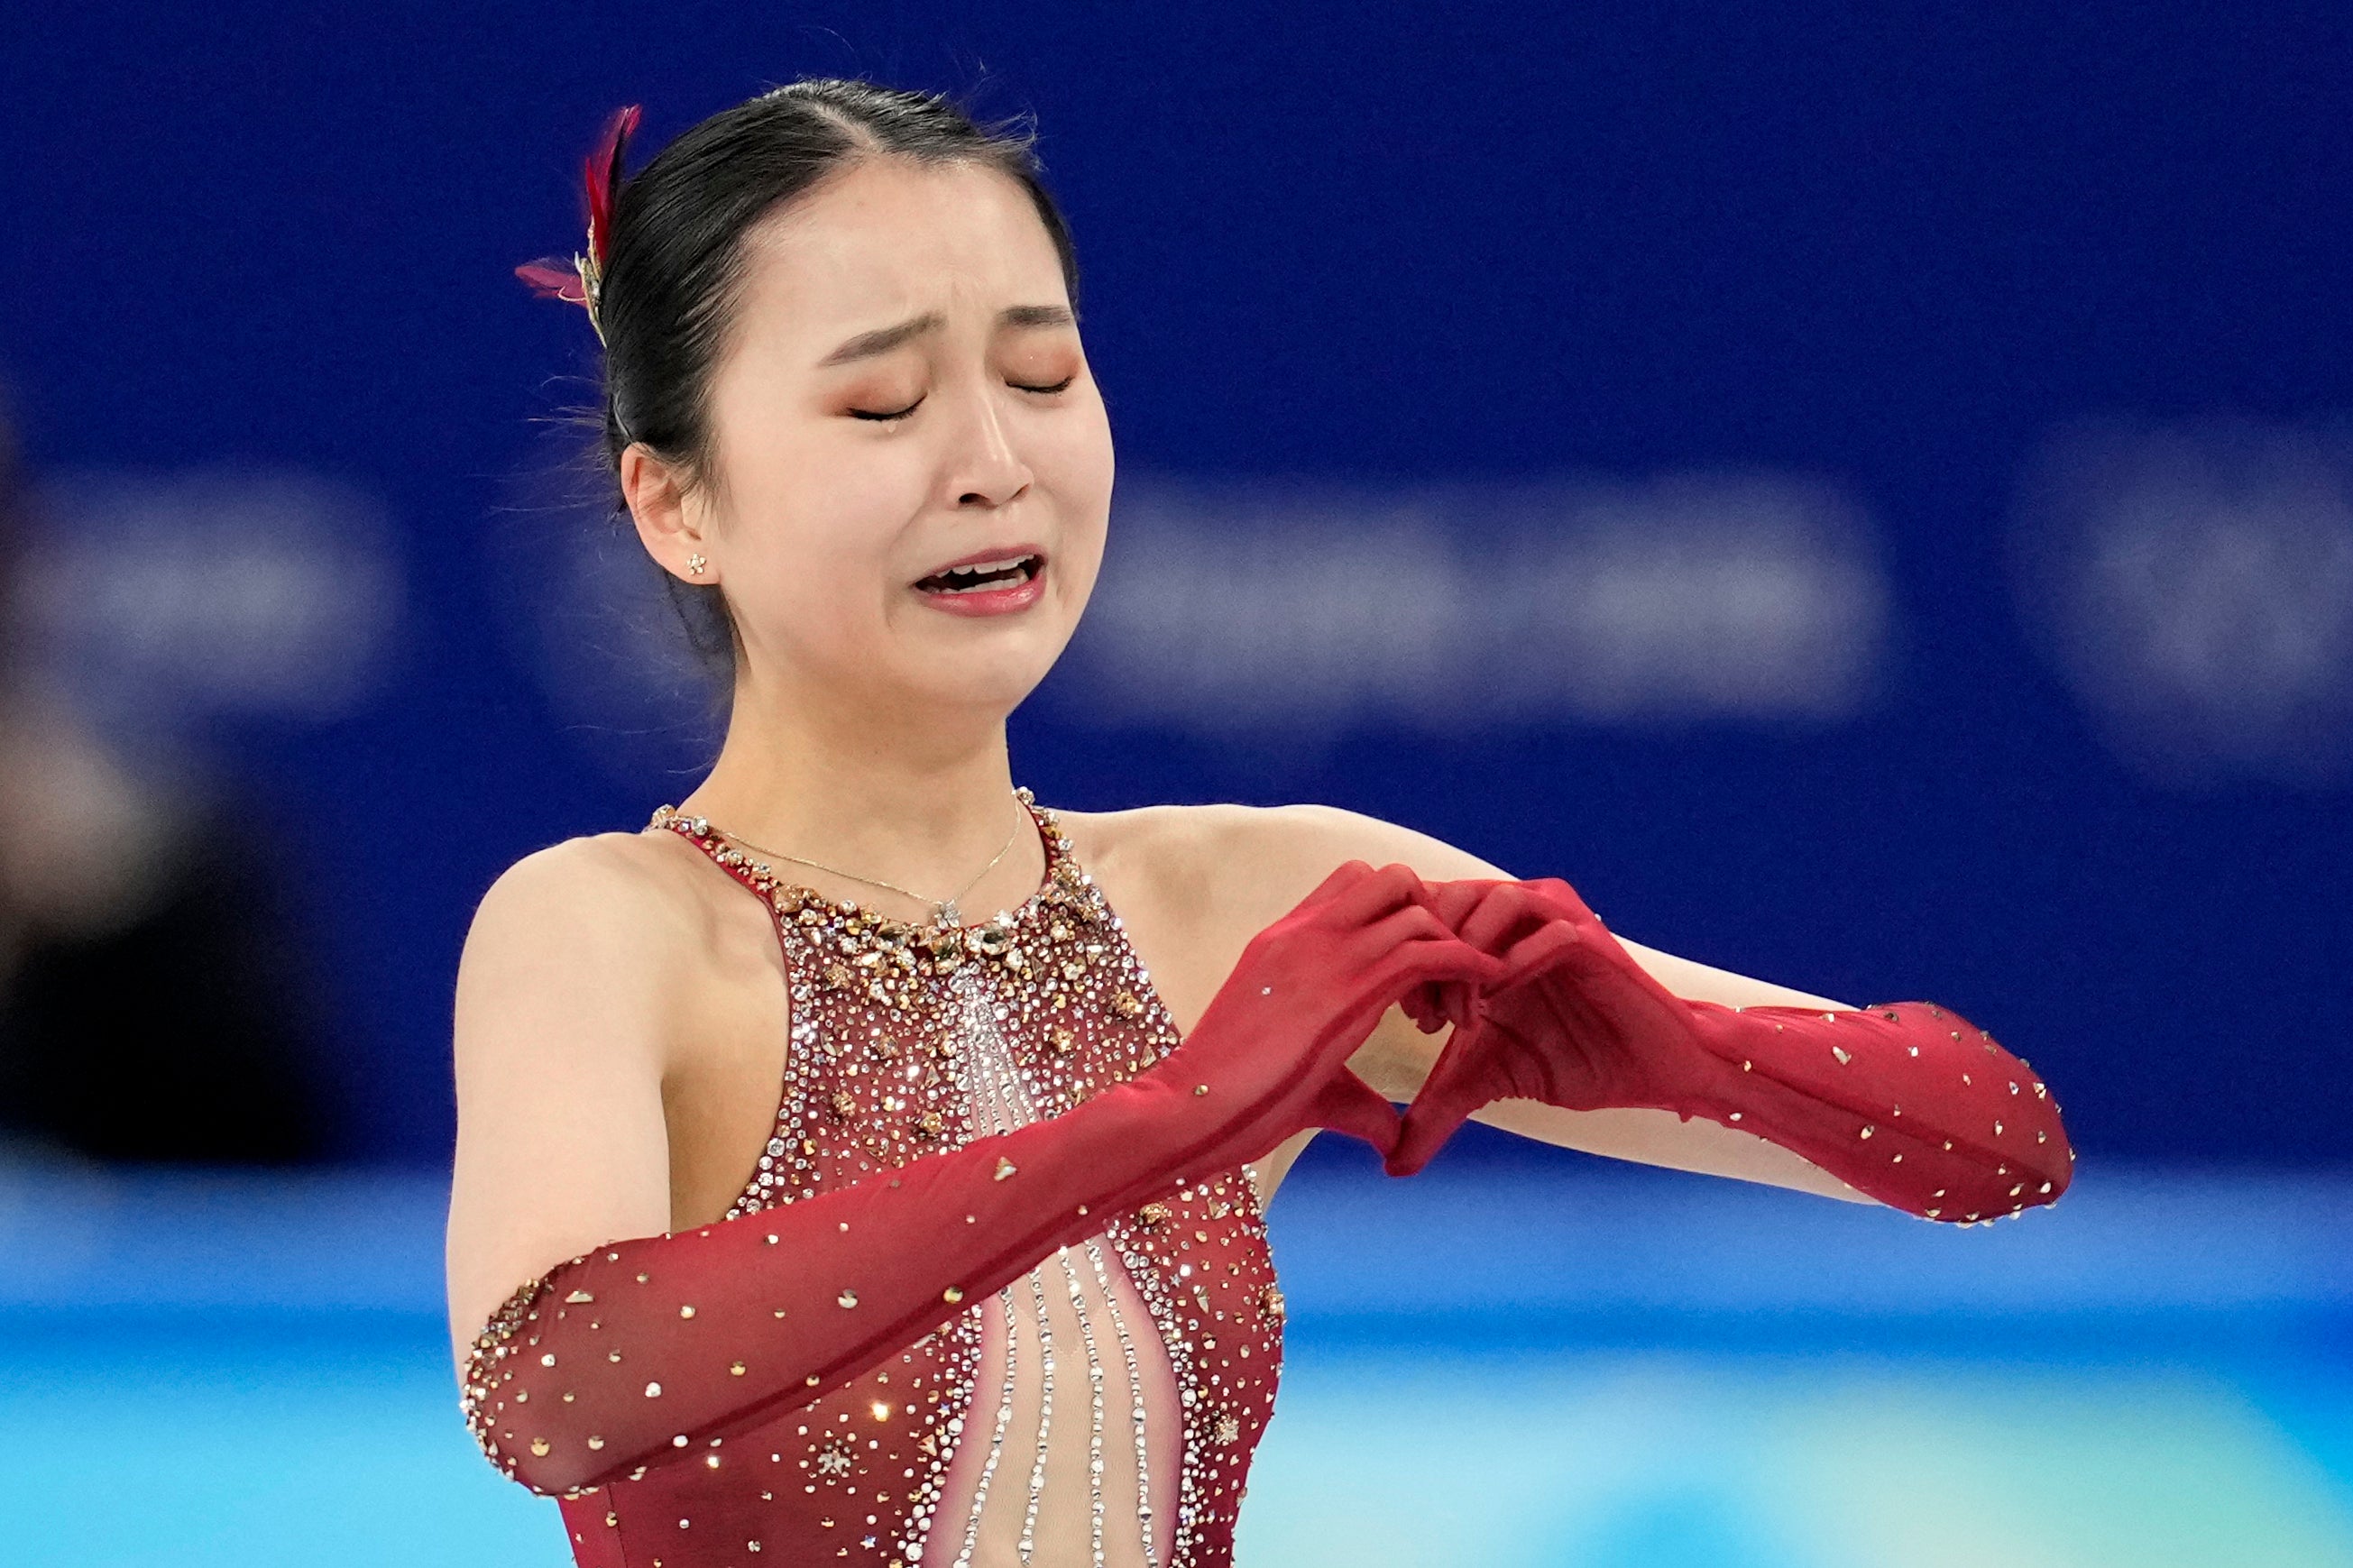 Zhu Yi Who is the Chinese figure skater facing brutal trolling at the Winter Olympics in Beijing? The Independent